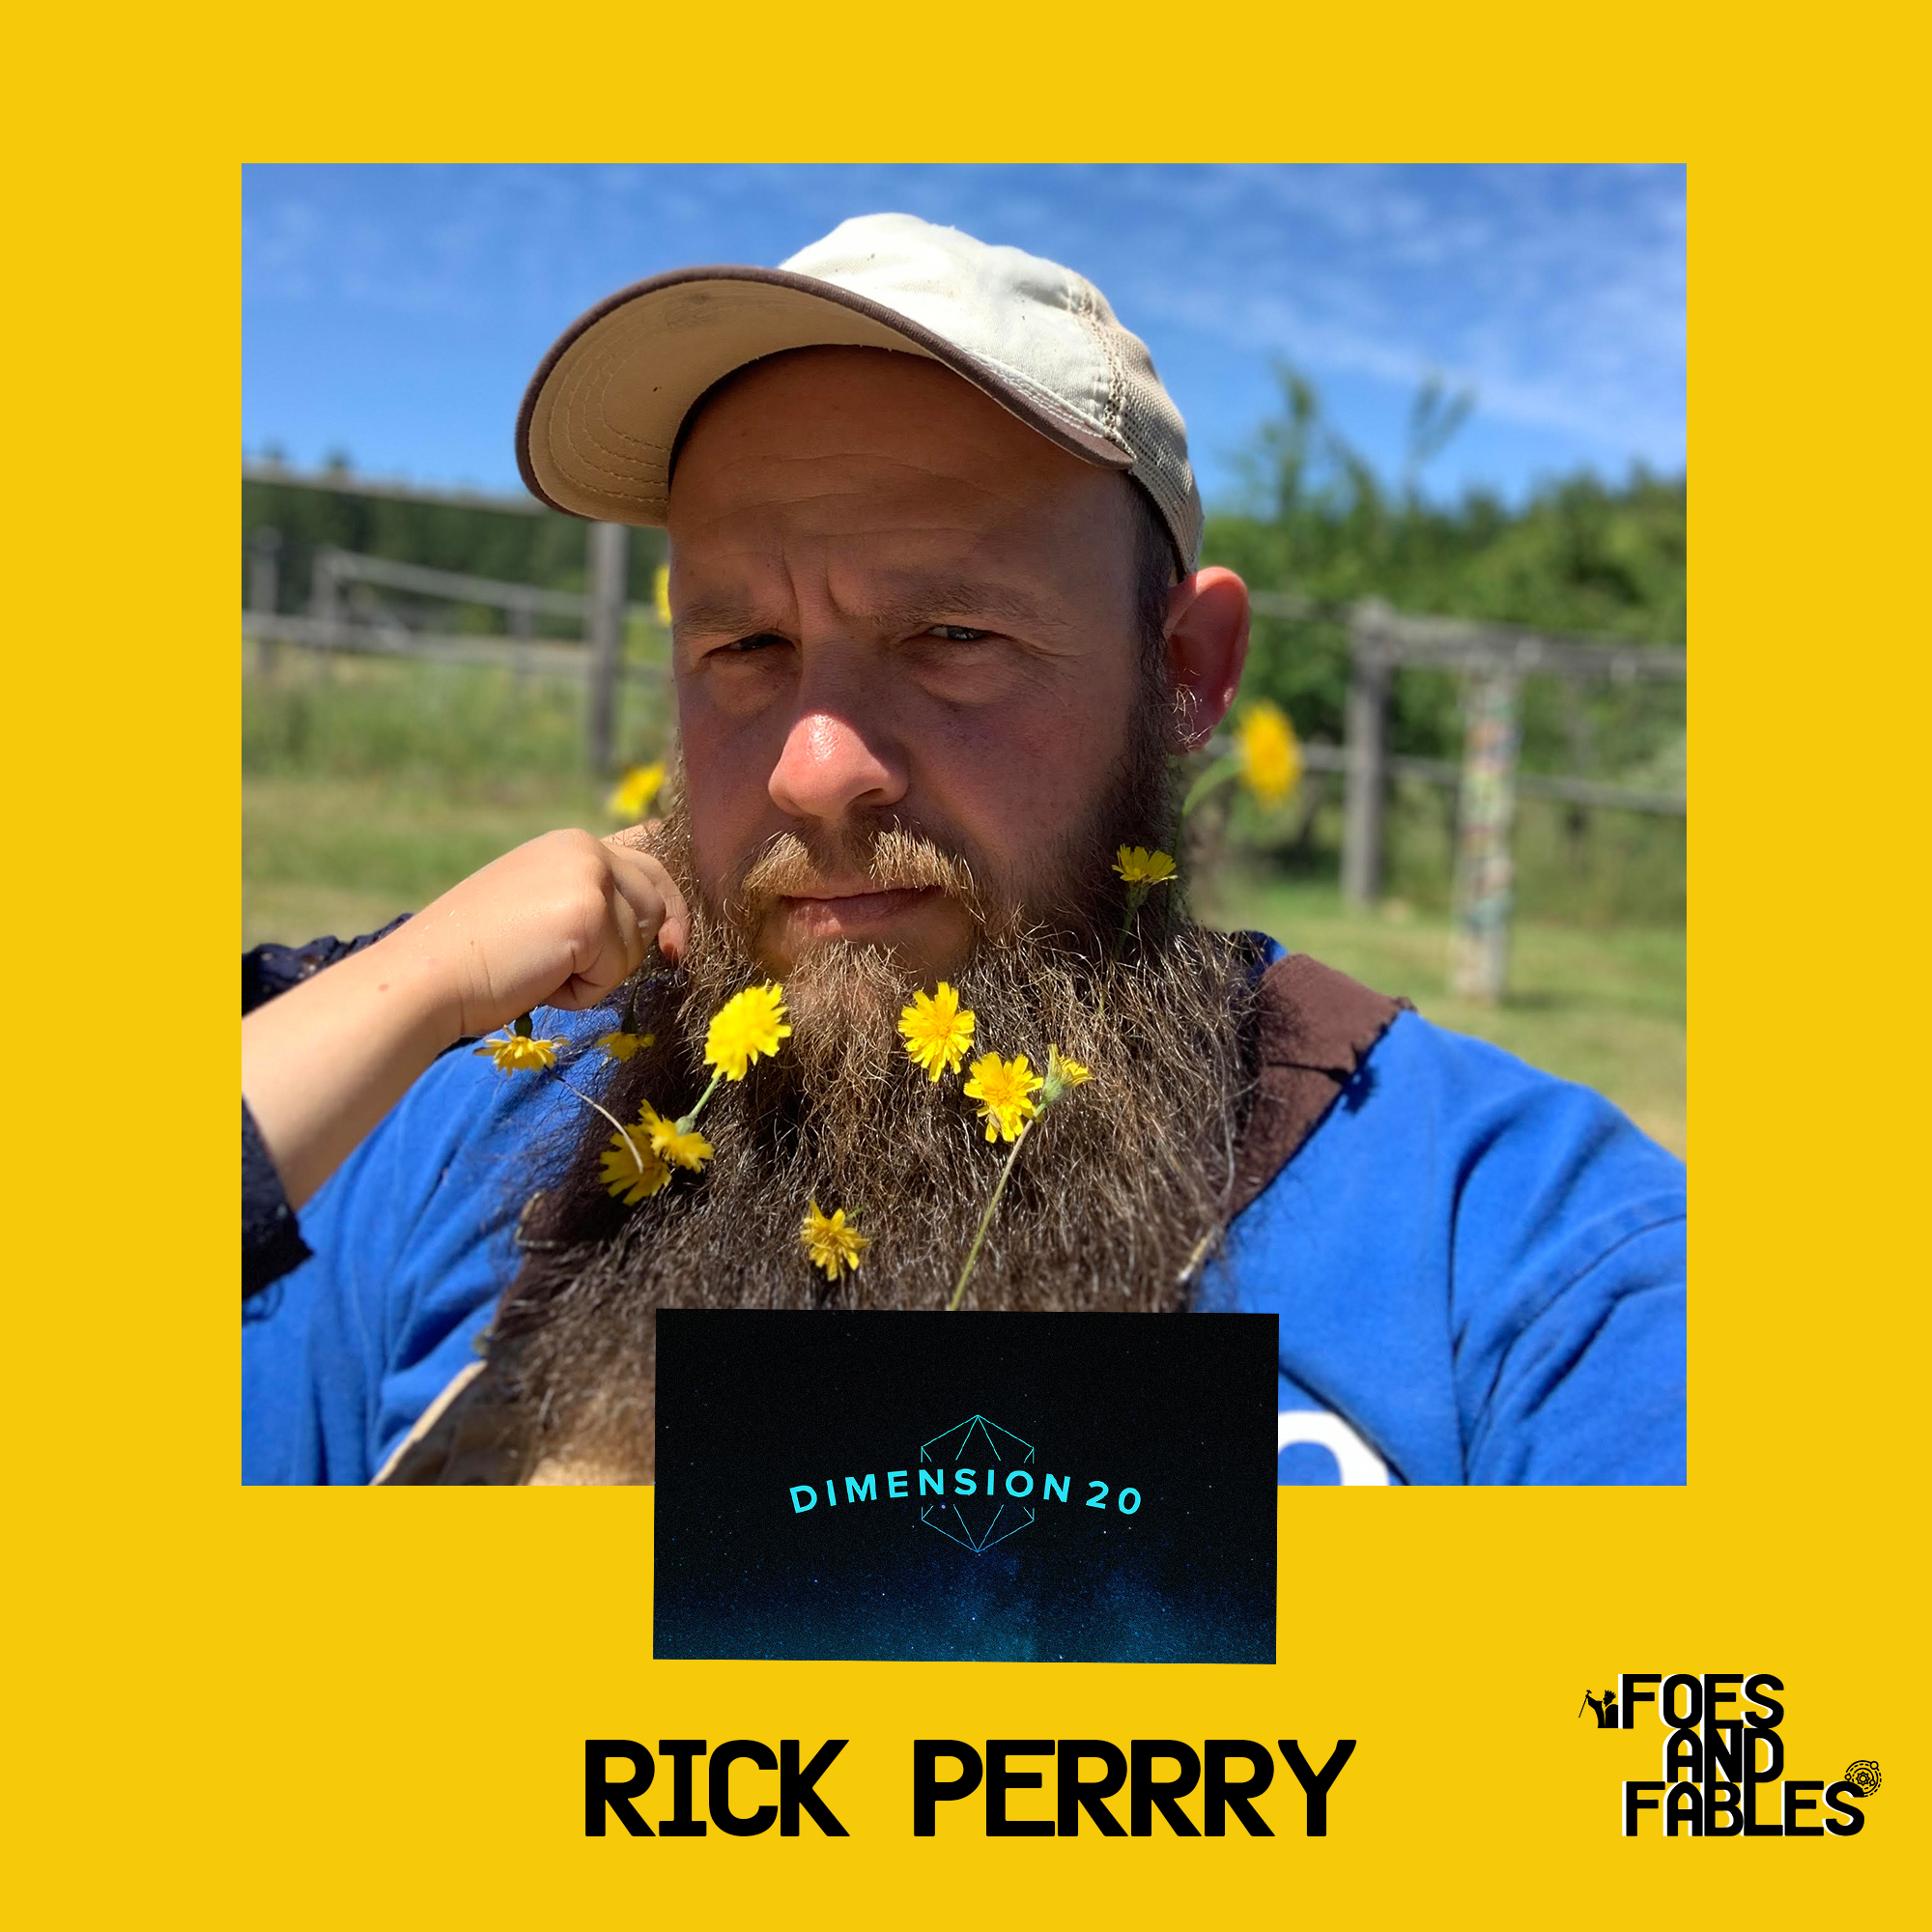 INTERVIEW - Rick Perry of Dimension 20 | Friends and Fables